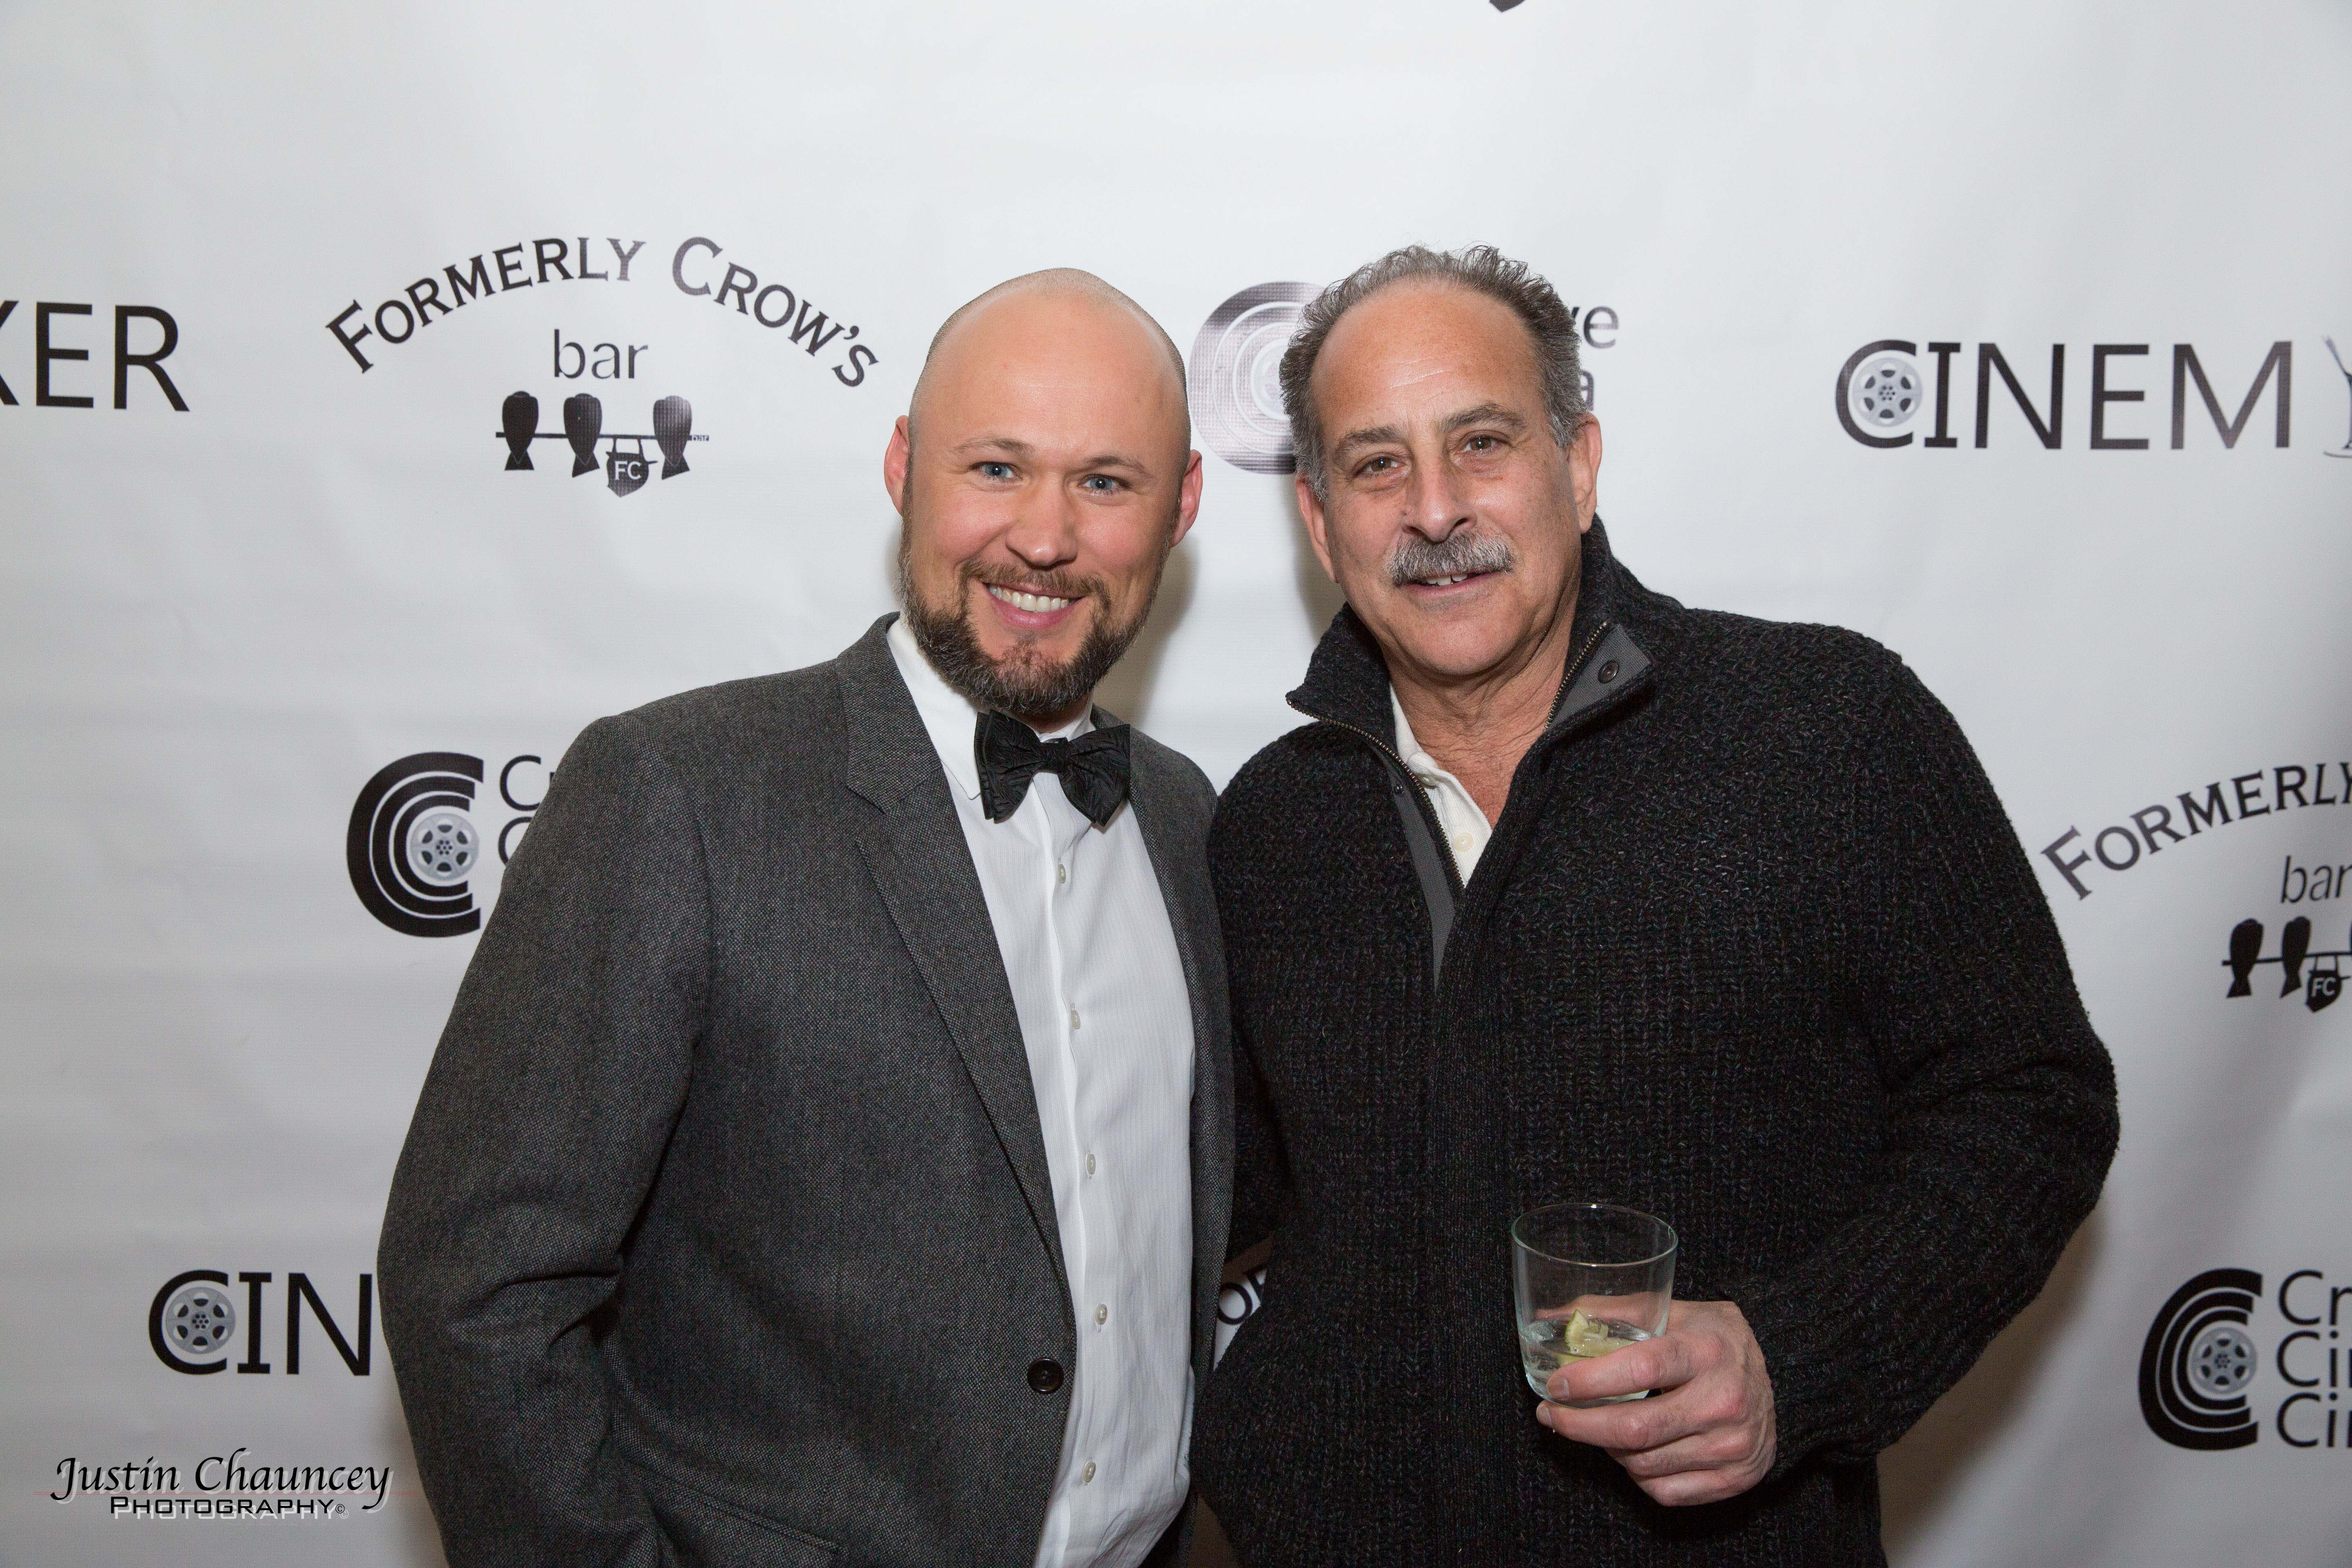 Producer James E. Oxford with Variety 411 President Jeffry Gitter at the Creative Cinema Circle's monthly Cinemixer filmmaker event.